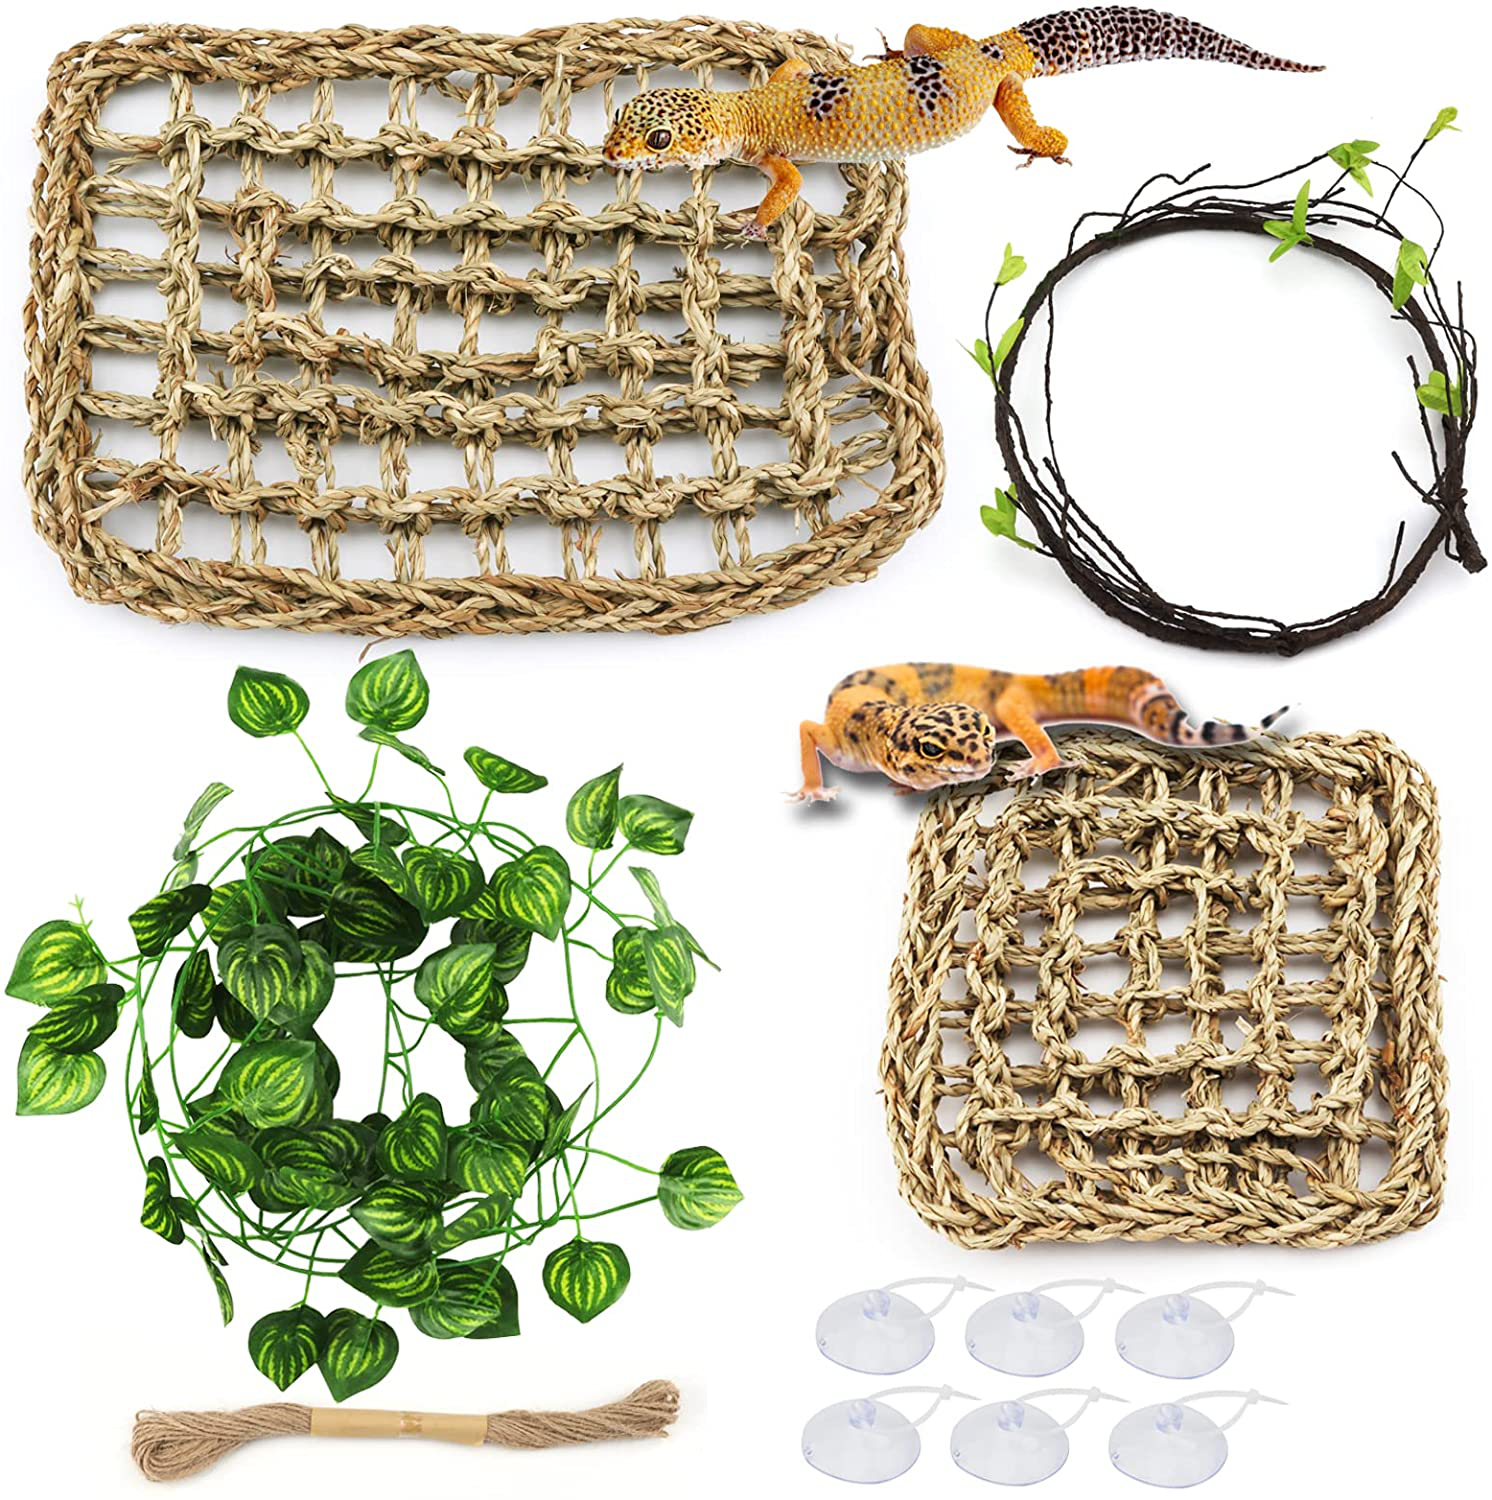 Pietypet Reptile Lizard Habitat Decor Accessories, Bearded Dragon Hammock, Reptile Hammock with Artificial Climbing Vines and Plants for Chameleon, Lizards, Gecko, Snakes, Lguana Animals & Pet Supplies > Pet Supplies > Reptile & Amphibian Supplies > Reptile & Amphibian Habitats PietyPet 2 Reptile Hammock with plants  